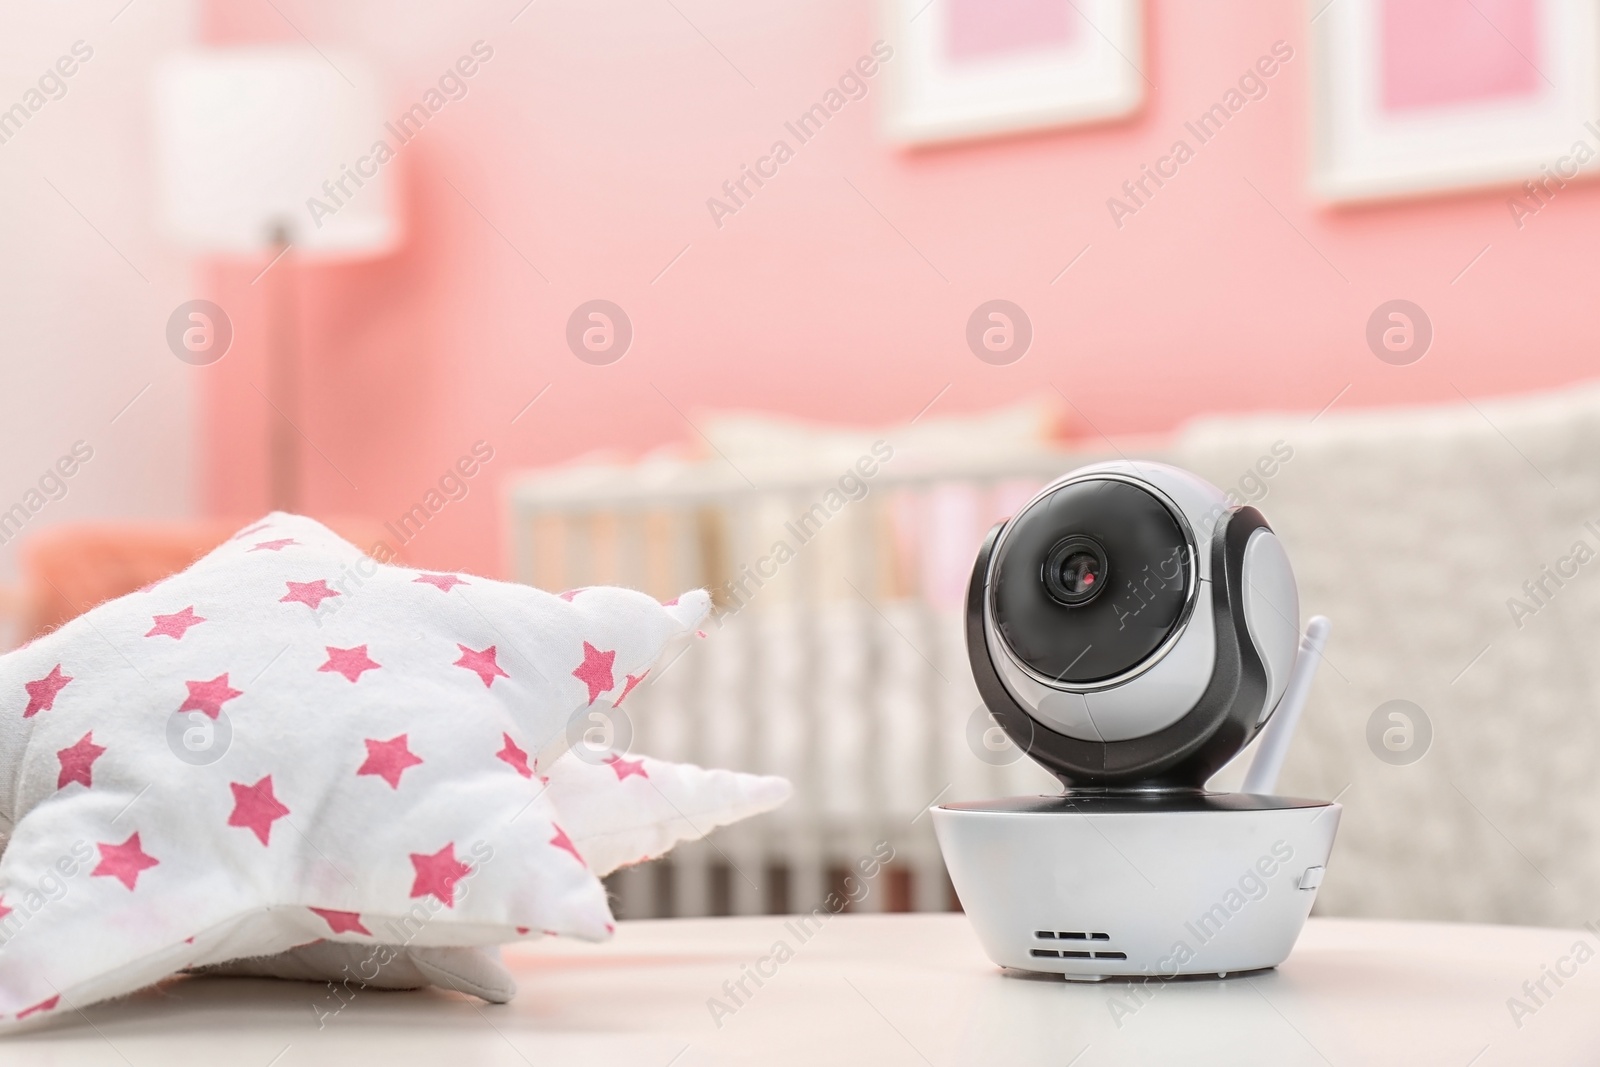 Photo of Baby monitor and toy on table in room, space for text. CCTV equipment